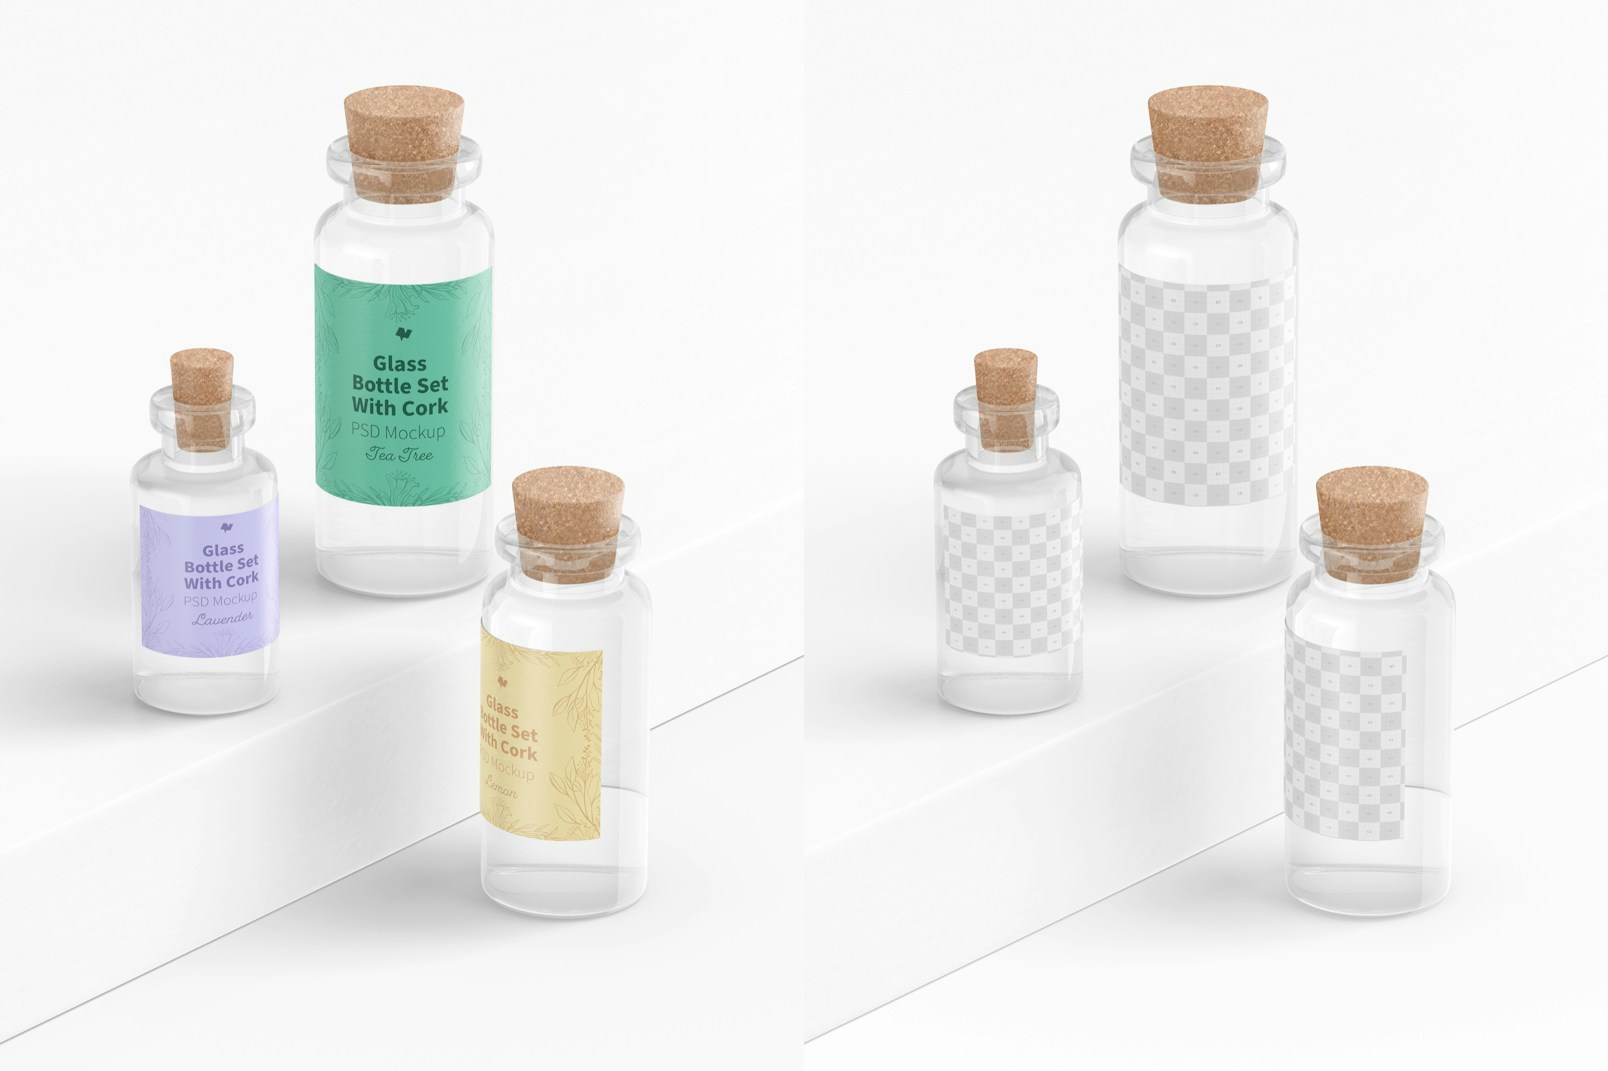 Glass Bottle Set with Cork Mockup, Left View